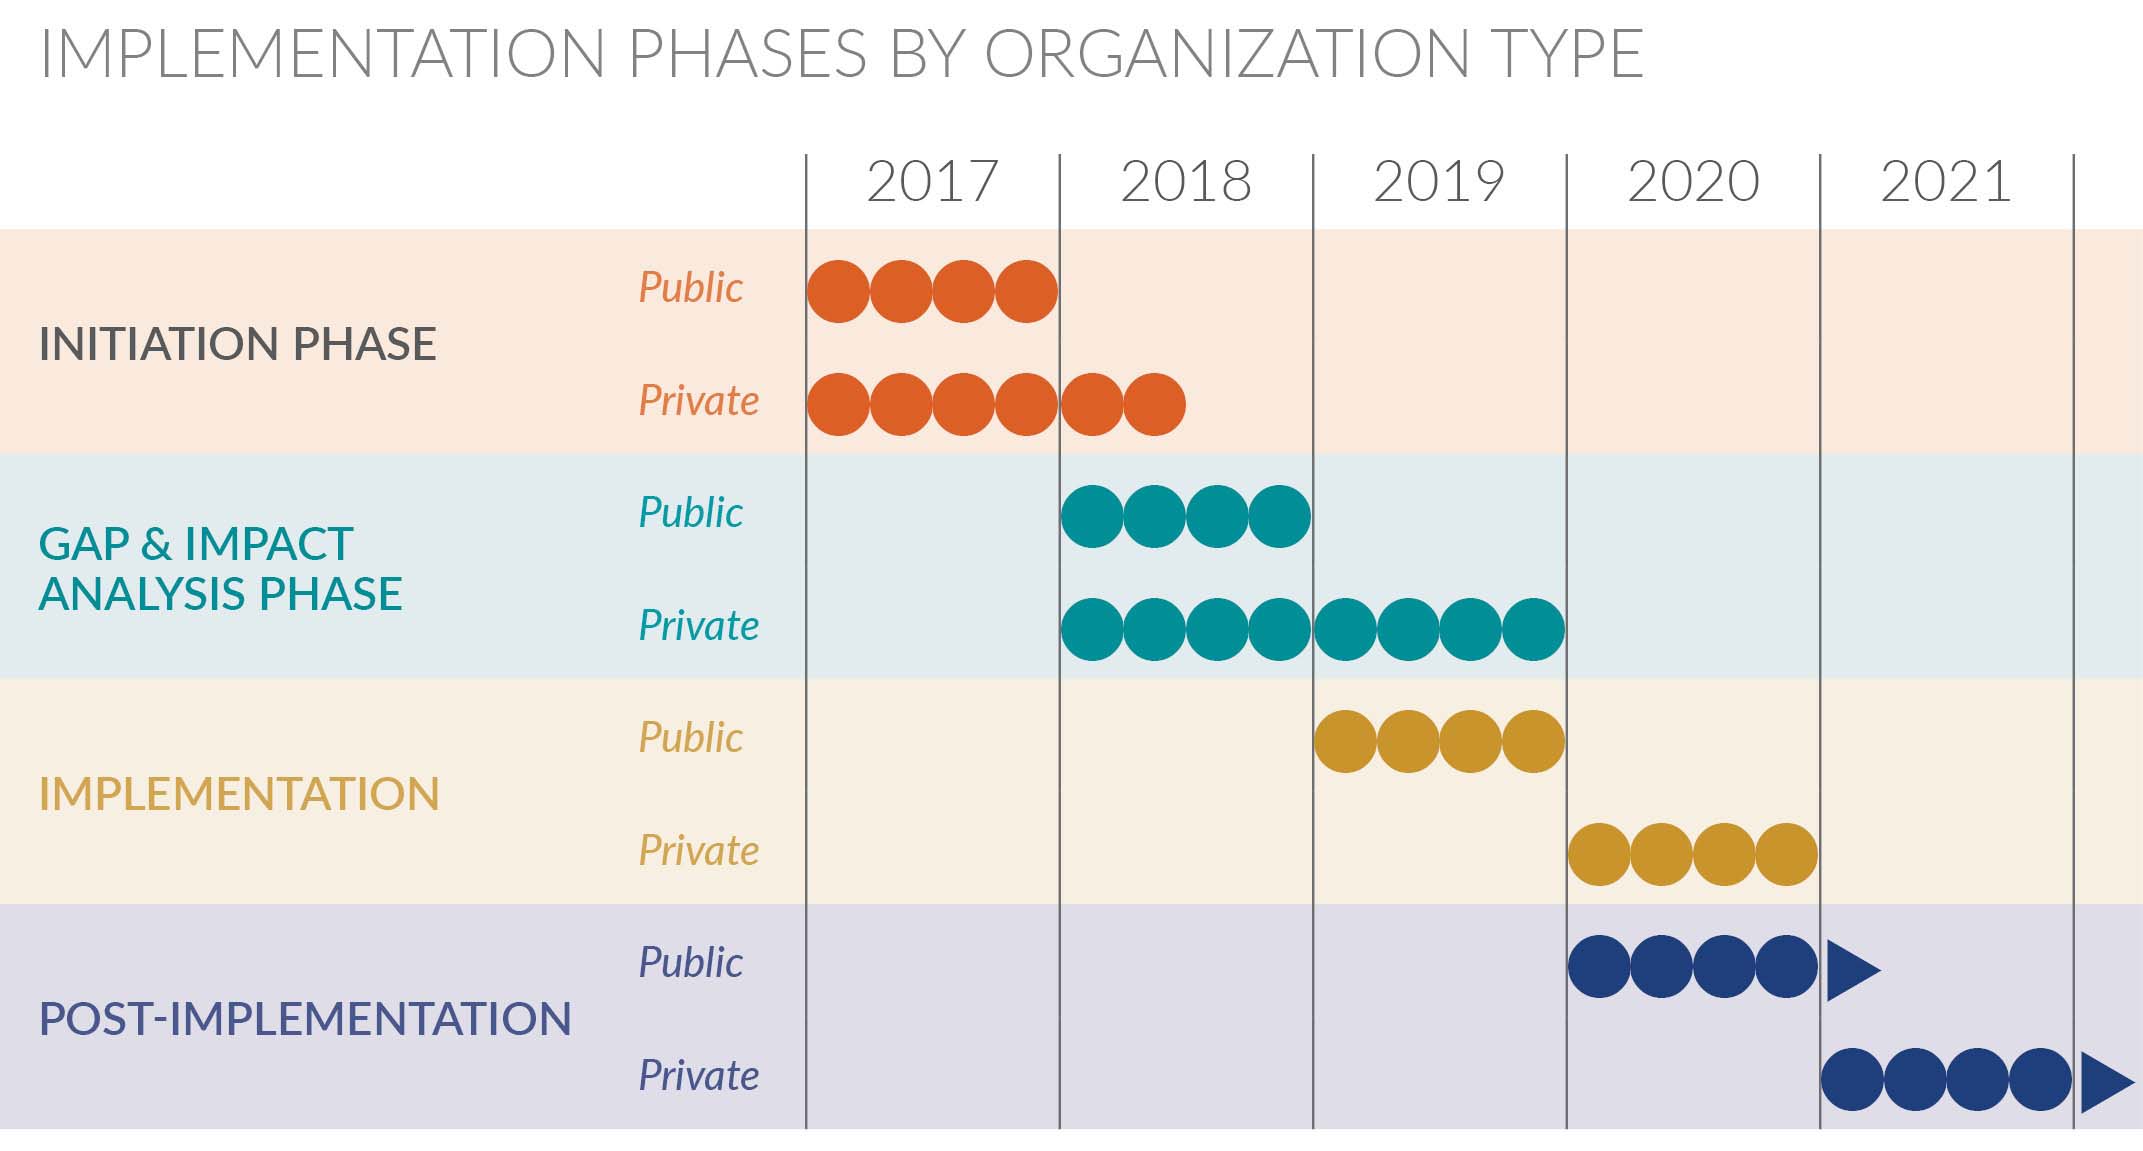 Lease accounting table indicating implementation phases by organization type.